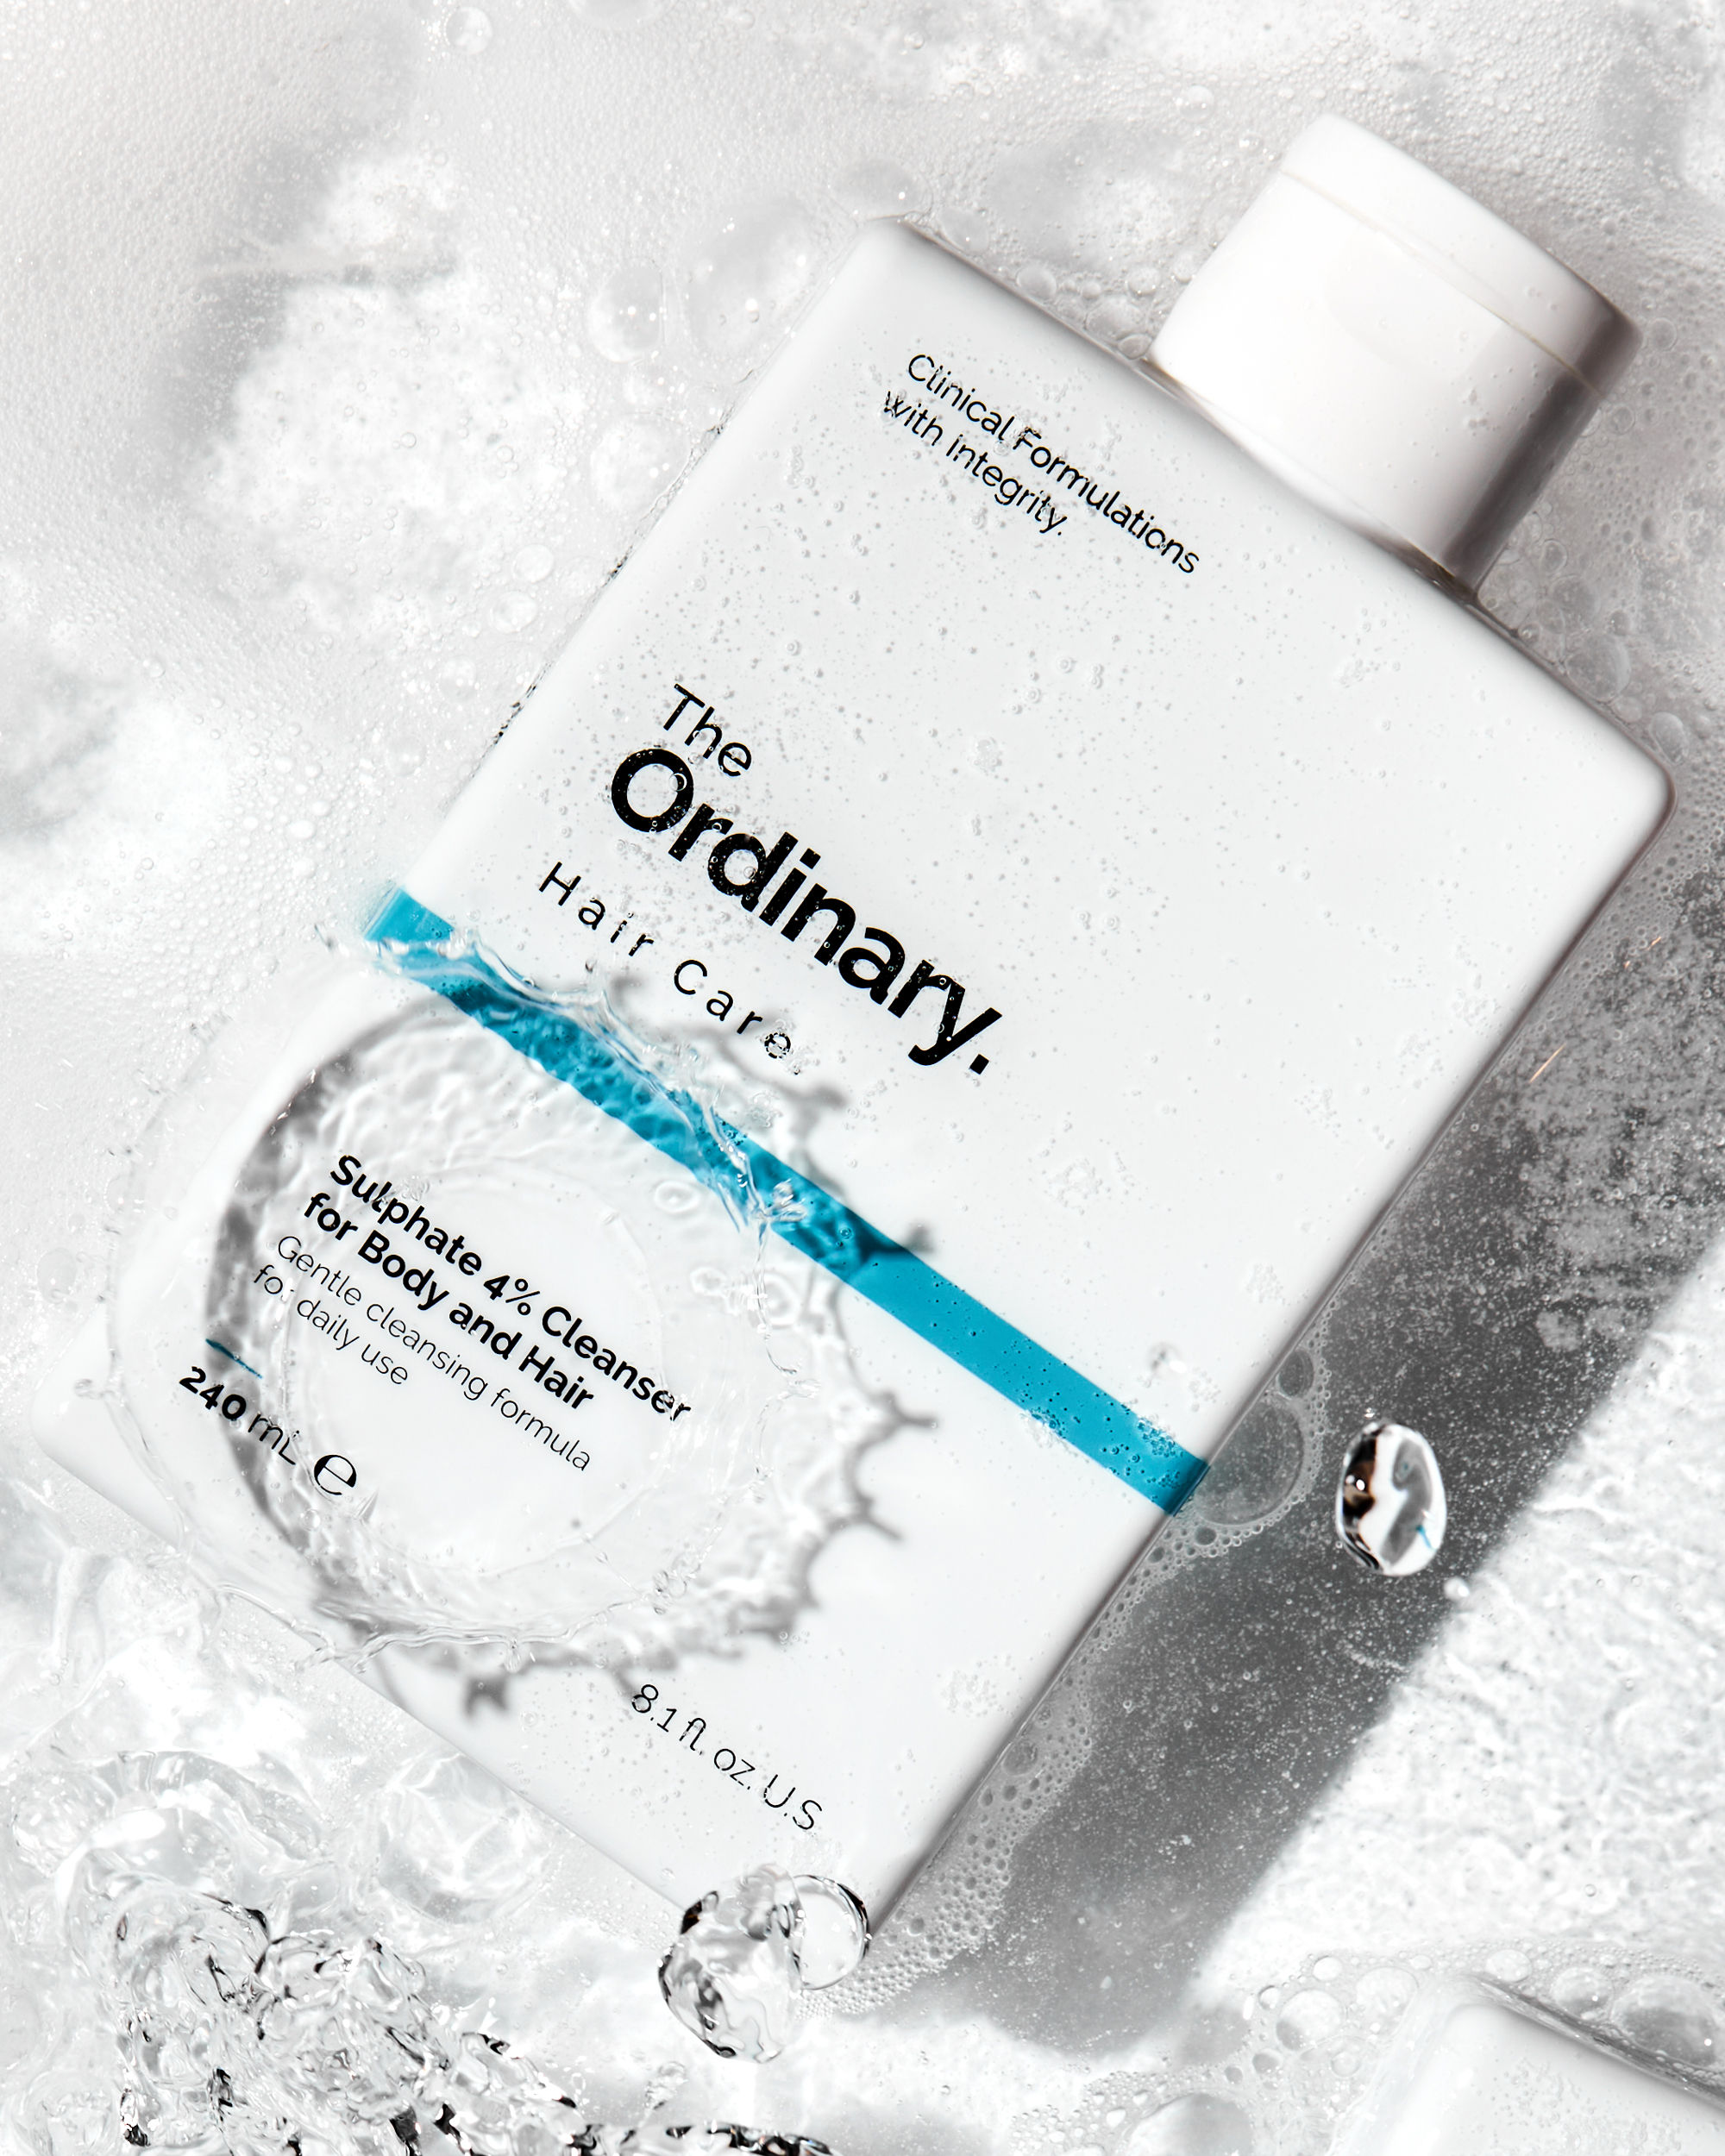 The Ordinary Hair Care: Sulphate 4% Cleanser for Body and Hair